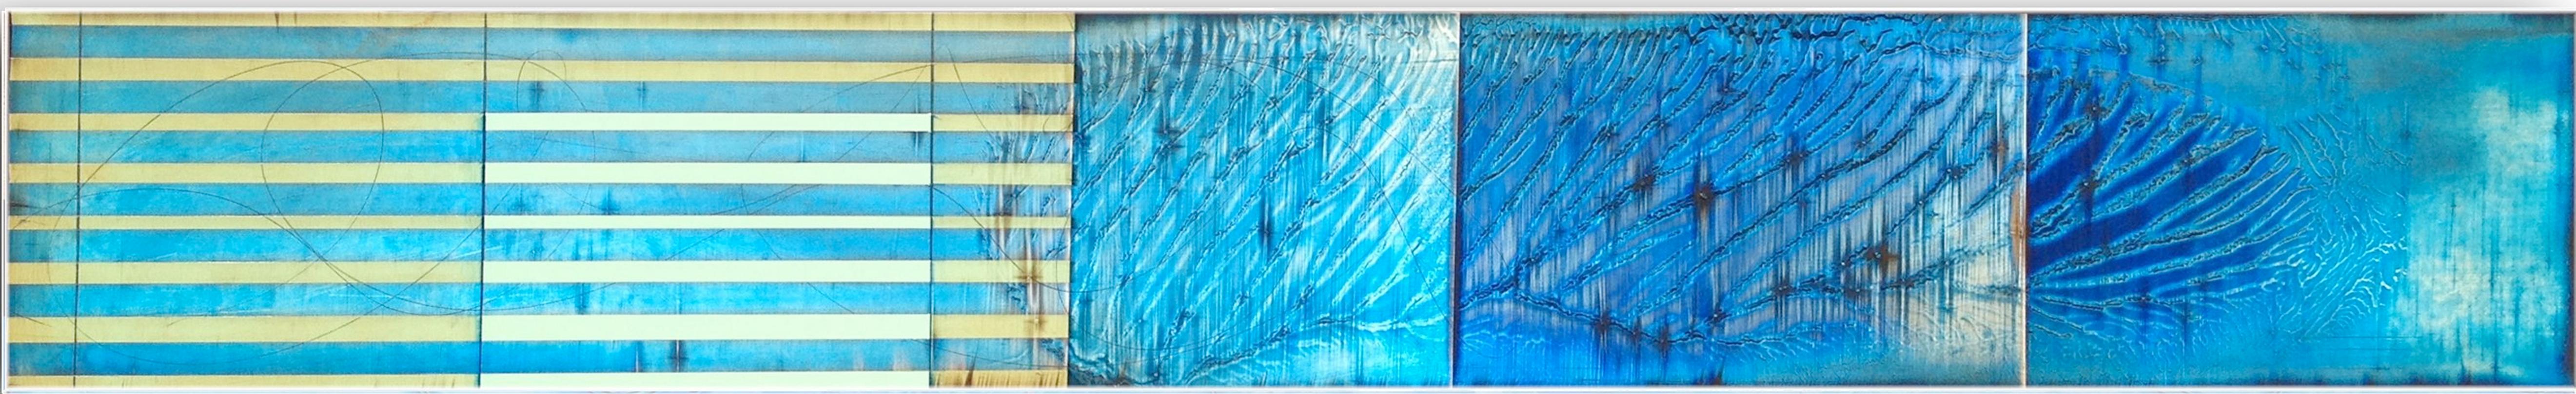 Michael Kessler Abstract Painting - Sky Graph 5